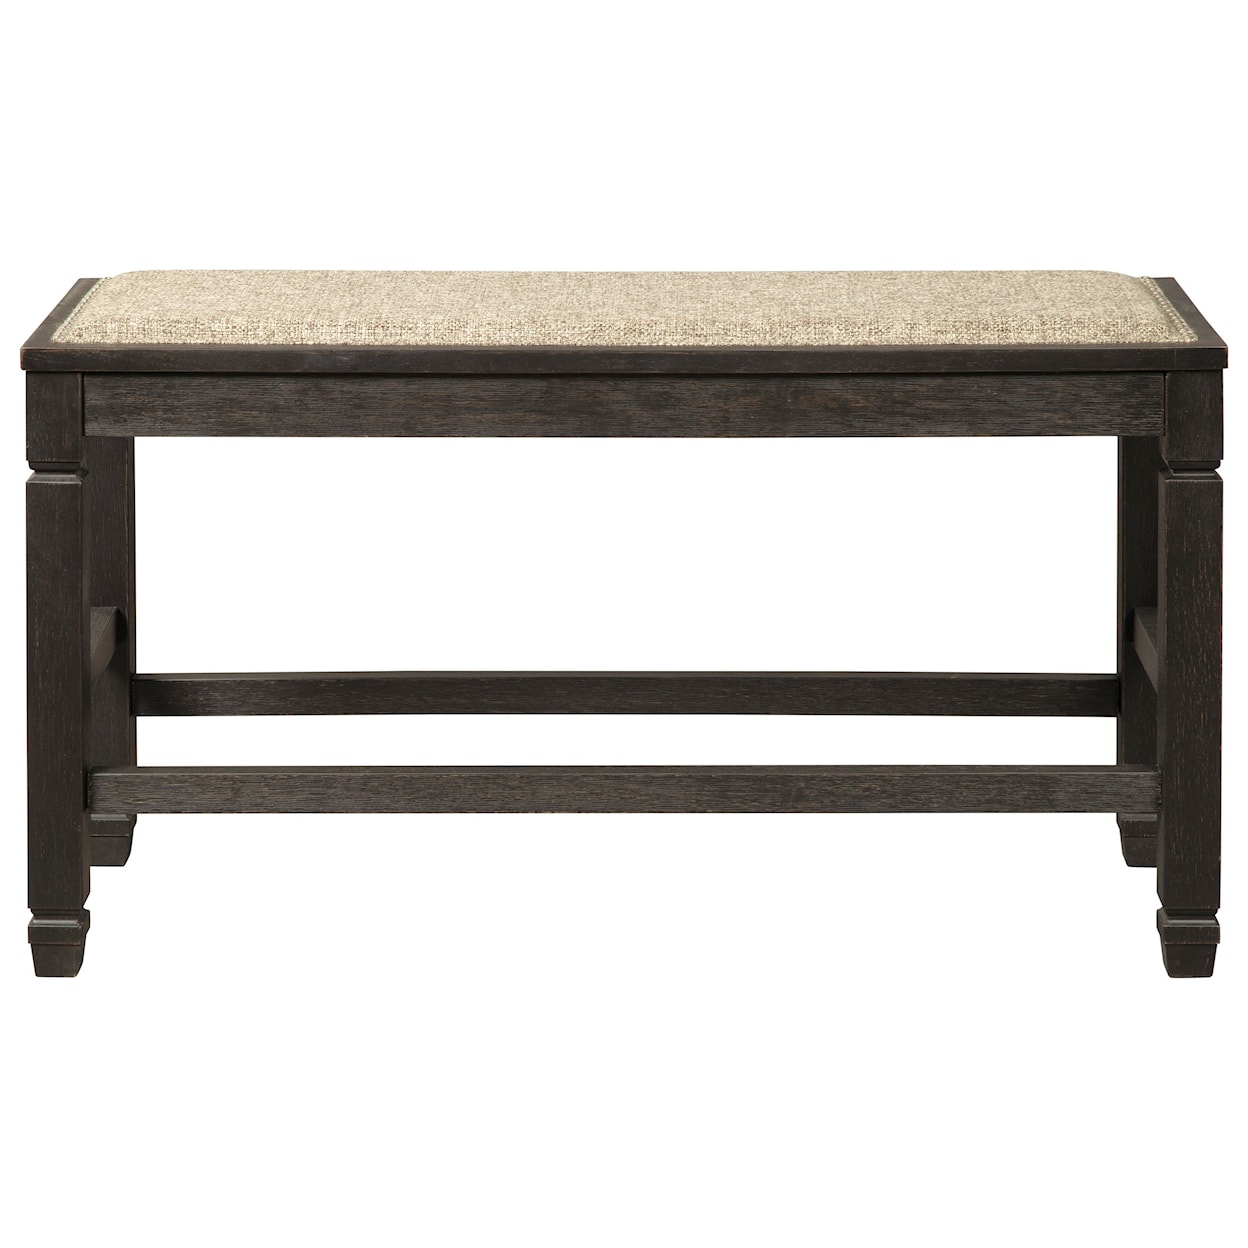 Signature Design by Ashley Tyler Creek Double Counter Upholstered Bench